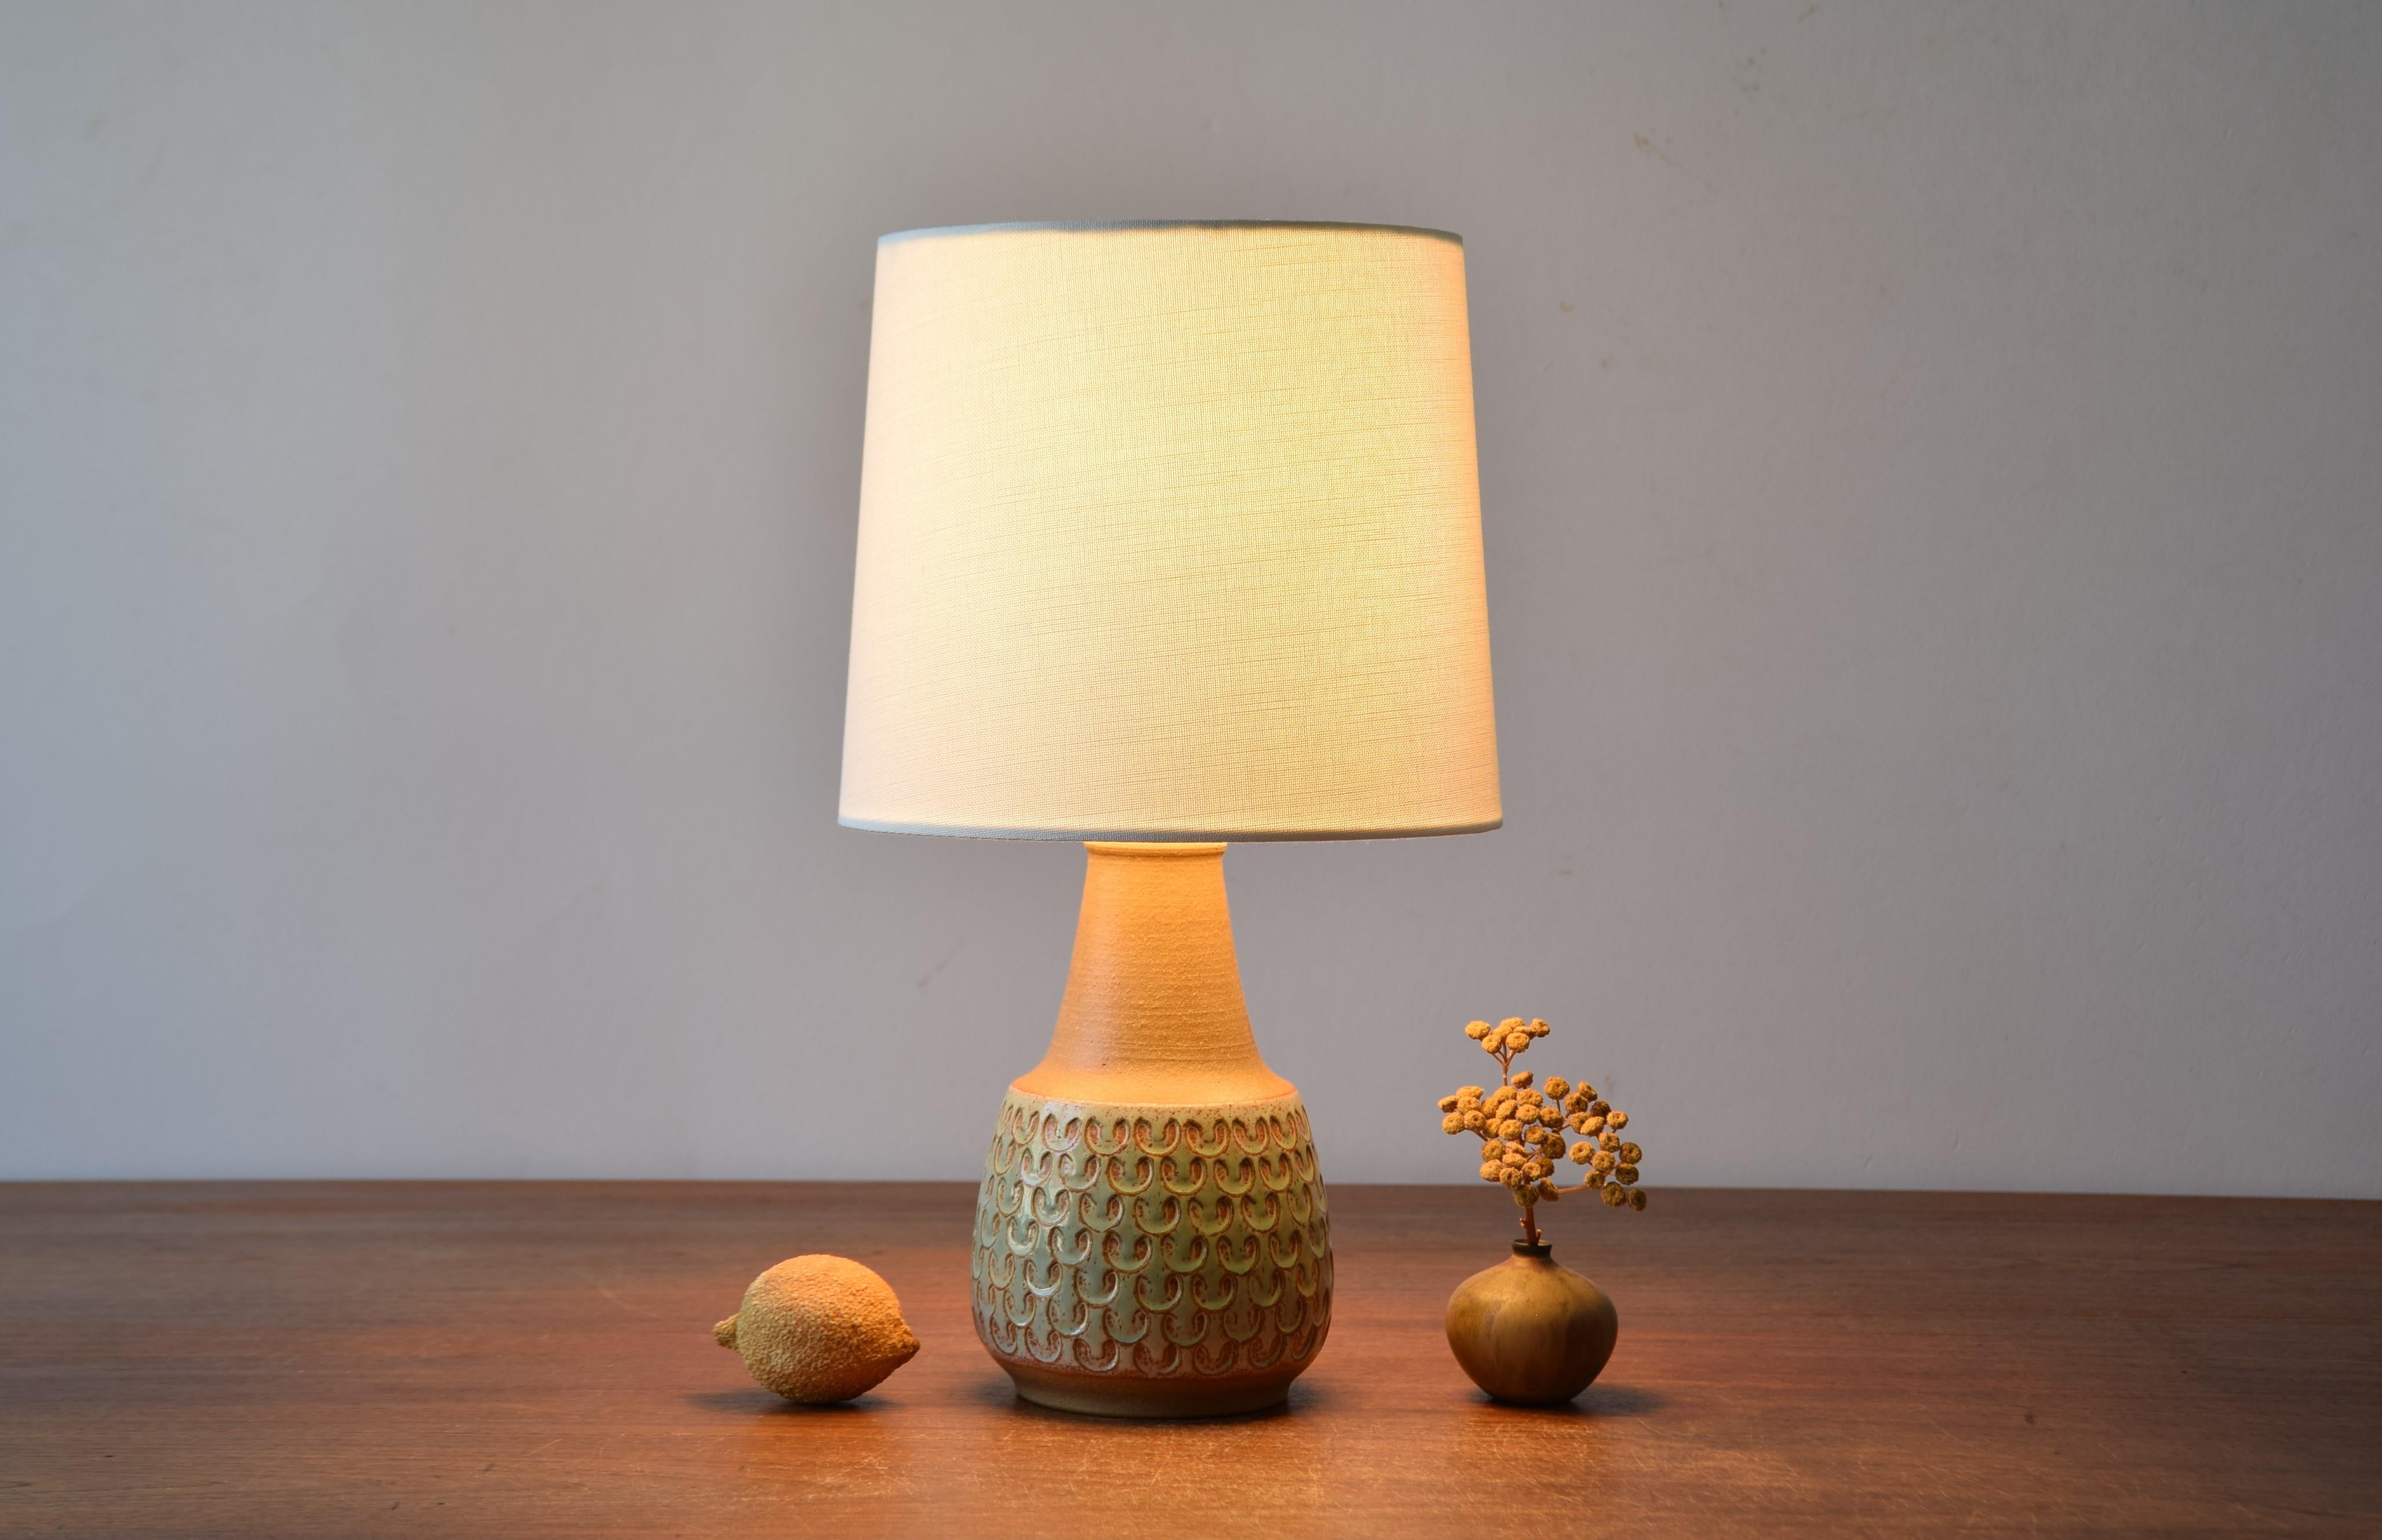 Midcentury Danish table lamp by Søholm Stentøj, Denmark. Made circa 1960s.
The lamp has repeated decor covered with a glossy pale green glaze contrasted by an unglazed neck in warm brown. 

Included is a new lamp shade designed and made in